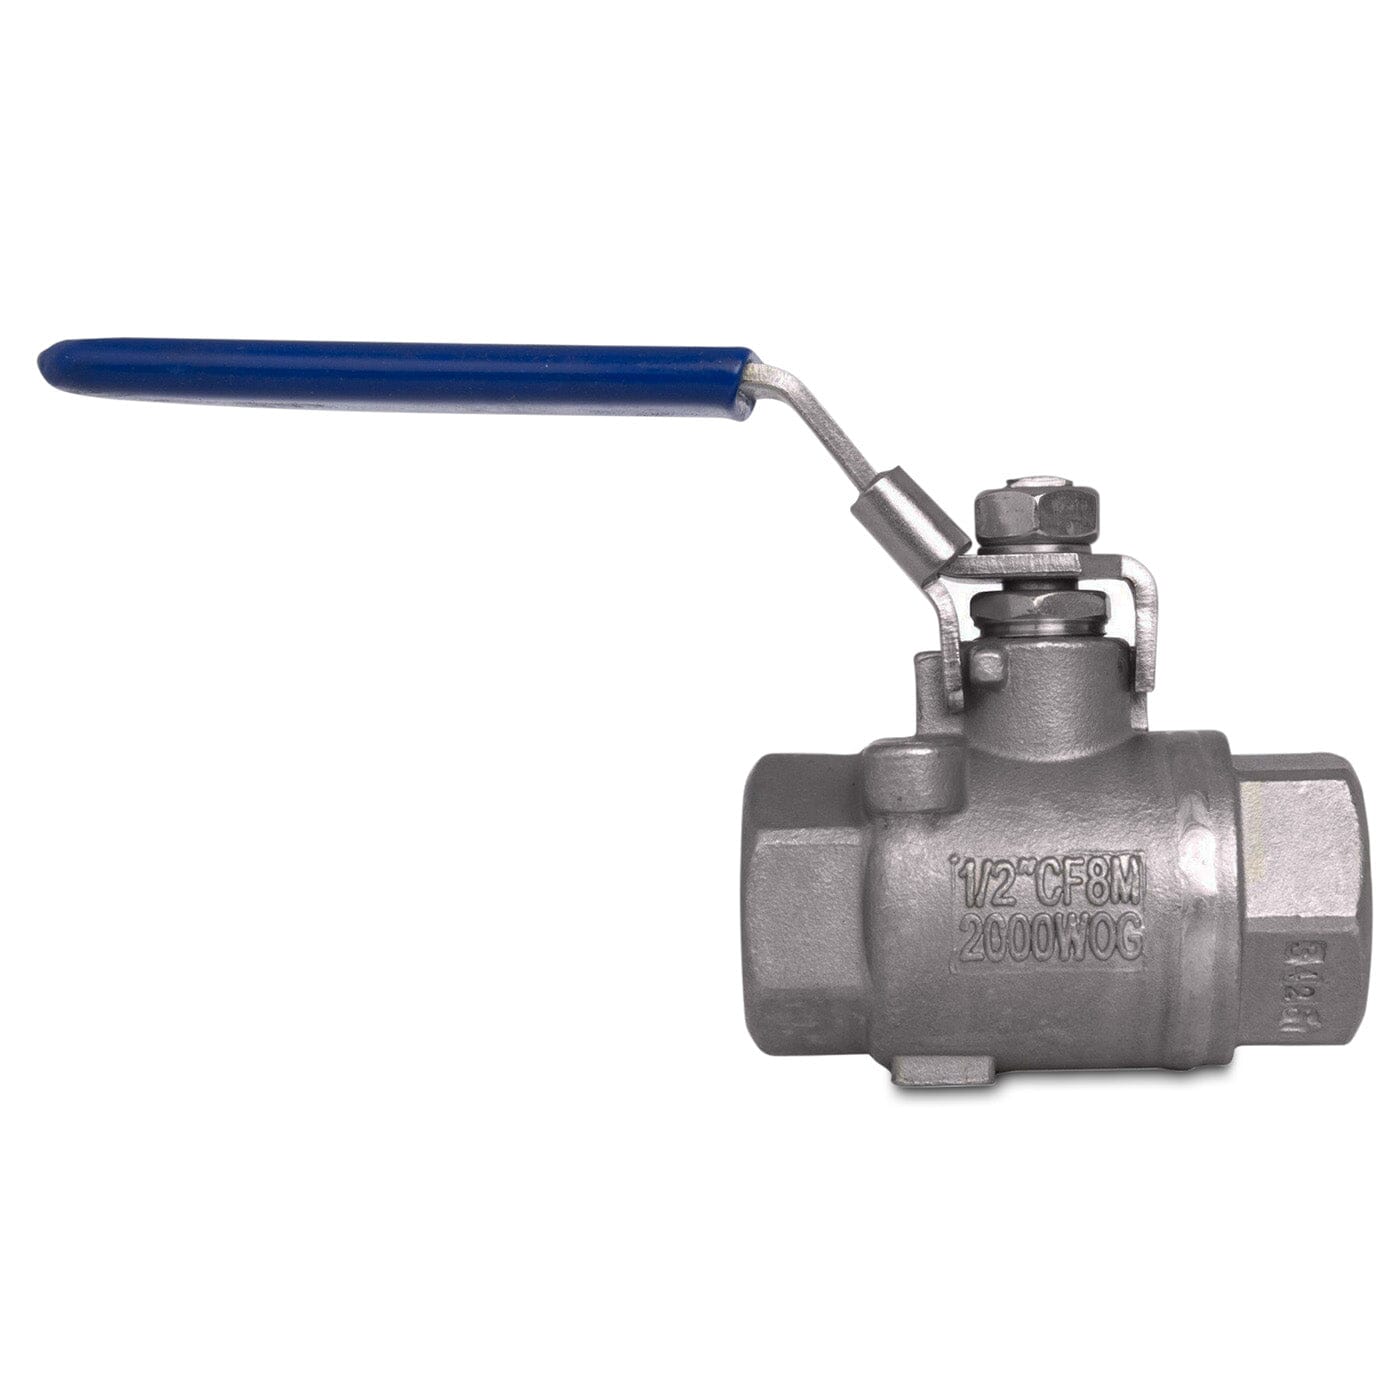 Stainless Steel 316 (CF8M) Seal Welded Full Port Ball Valve - 2,000 PSI (WOG) Shop All Categories DuraChoice 1/4-inch FNPT 